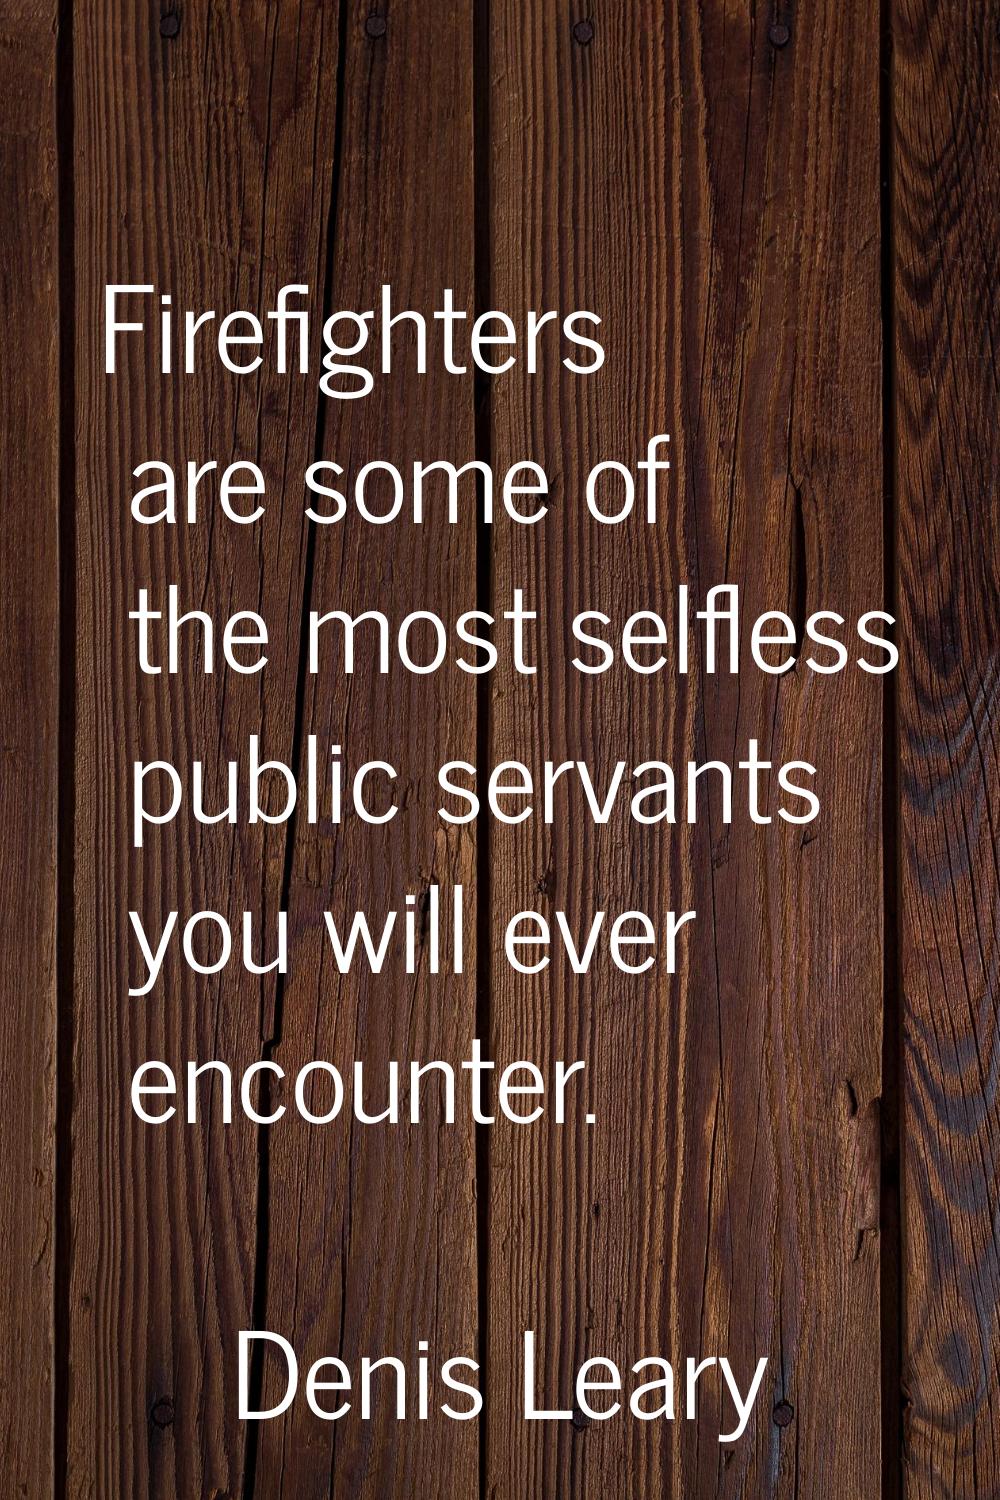 Firefighters are some of the most selfless public servants you will ever encounter.